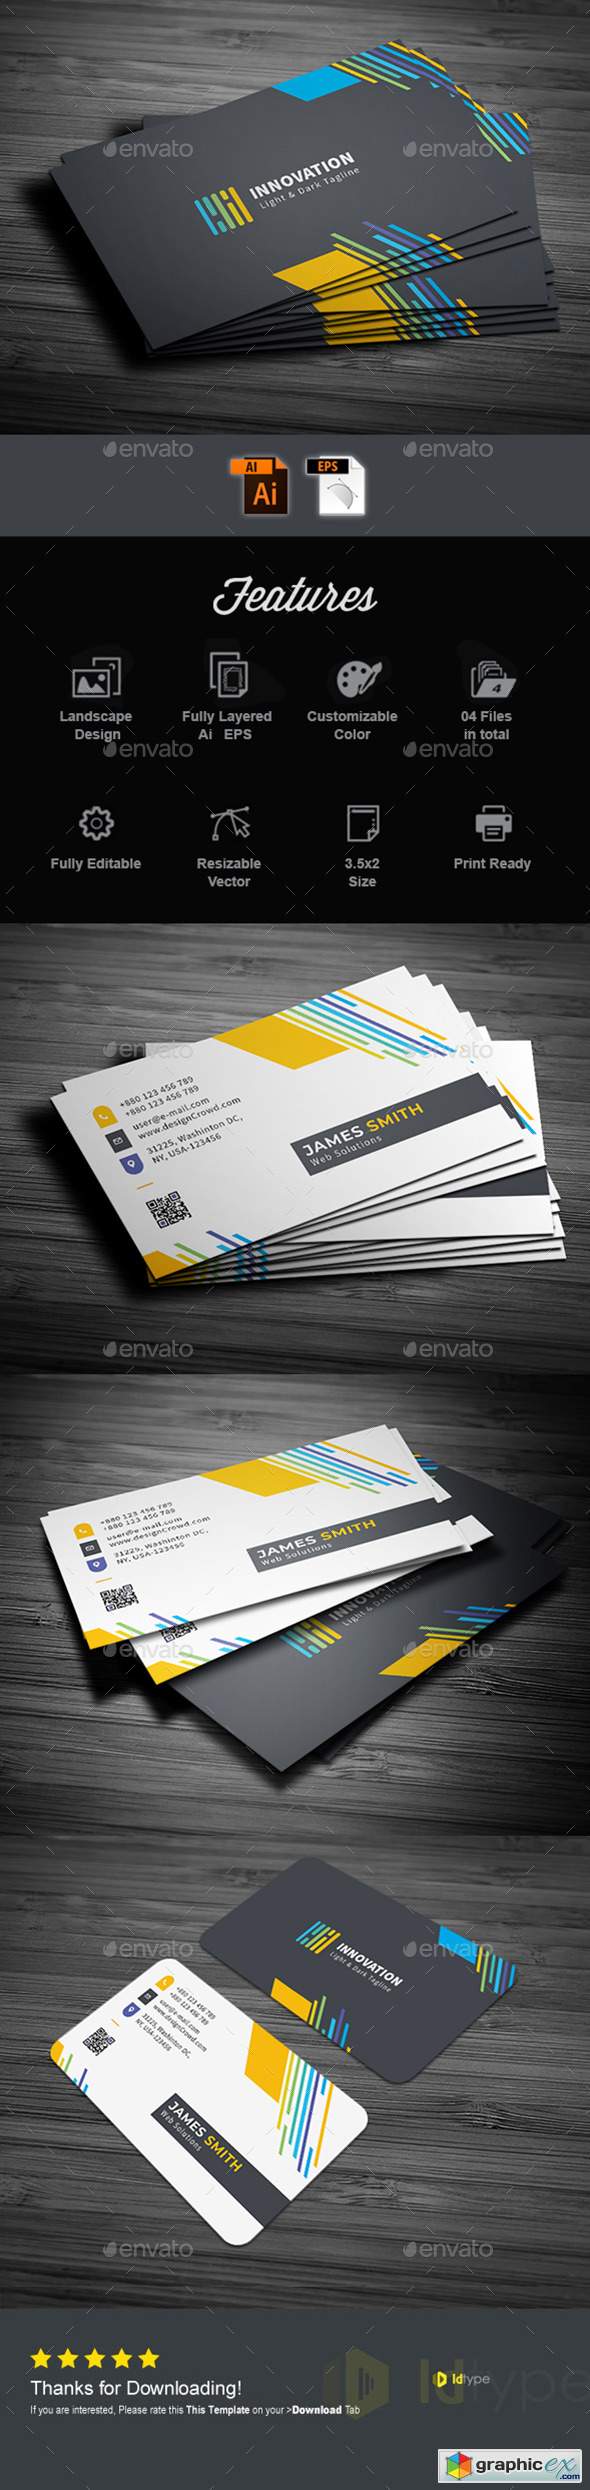 Business Card 22604474